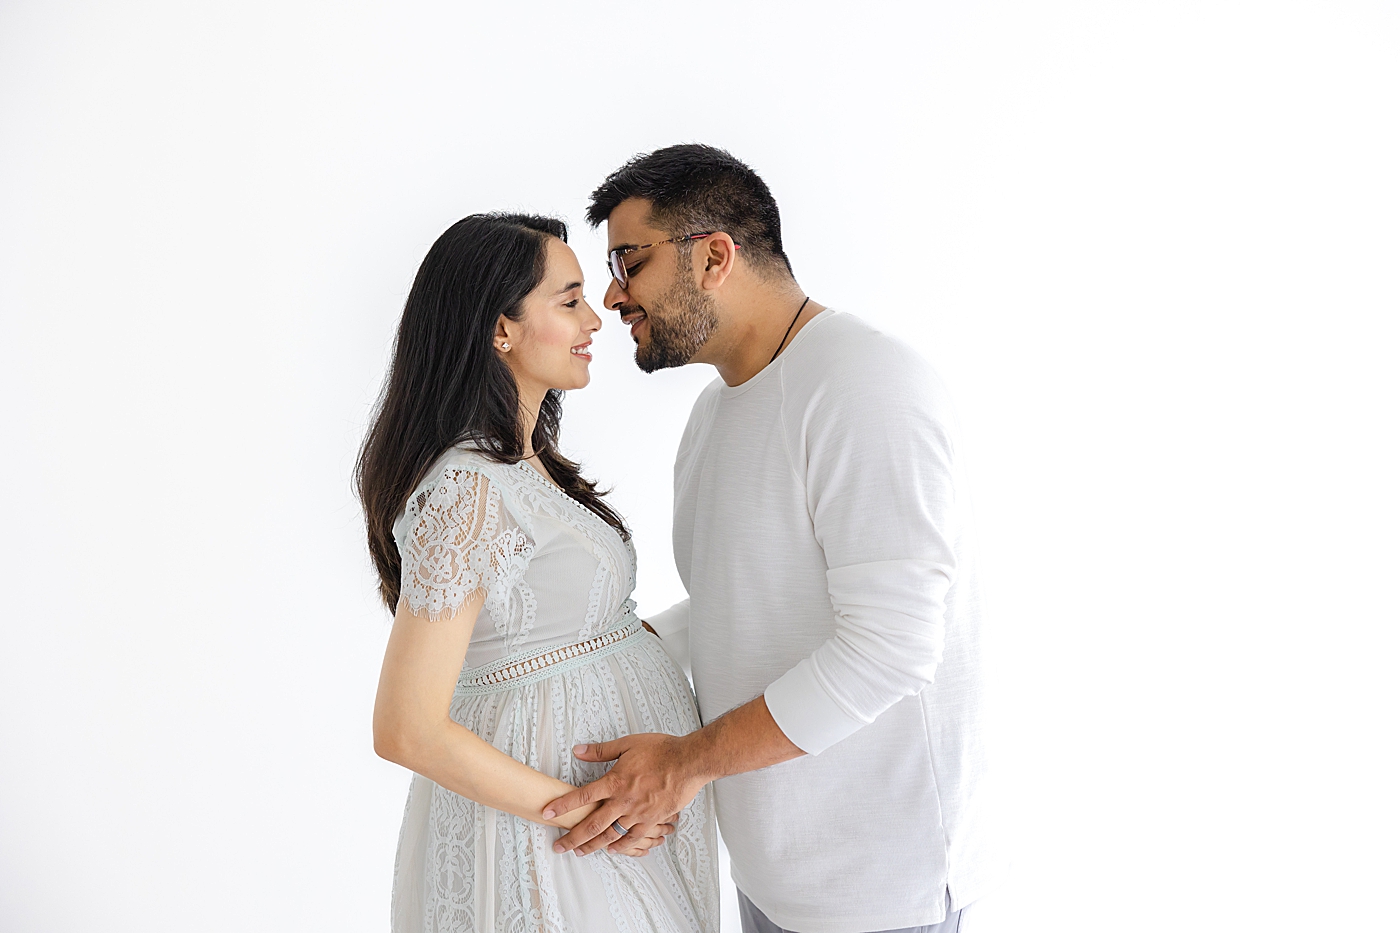 Mom and dad to be holding mom's belly | Image by Sana Ahmed Photography